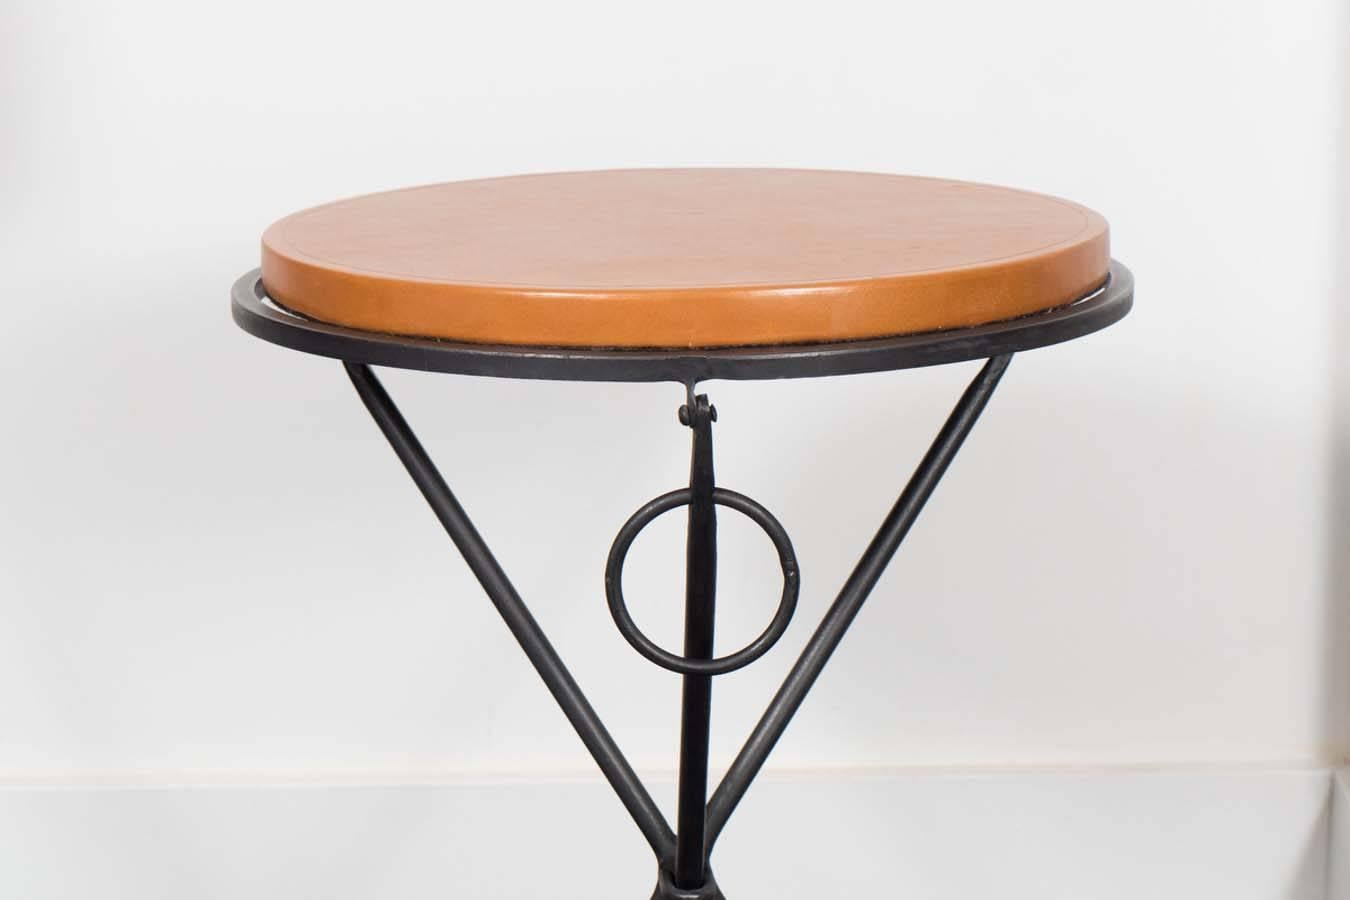 Pair of French Occasional Tables im Zustand „Hervorragend“ im Angebot in Newburgh, NY